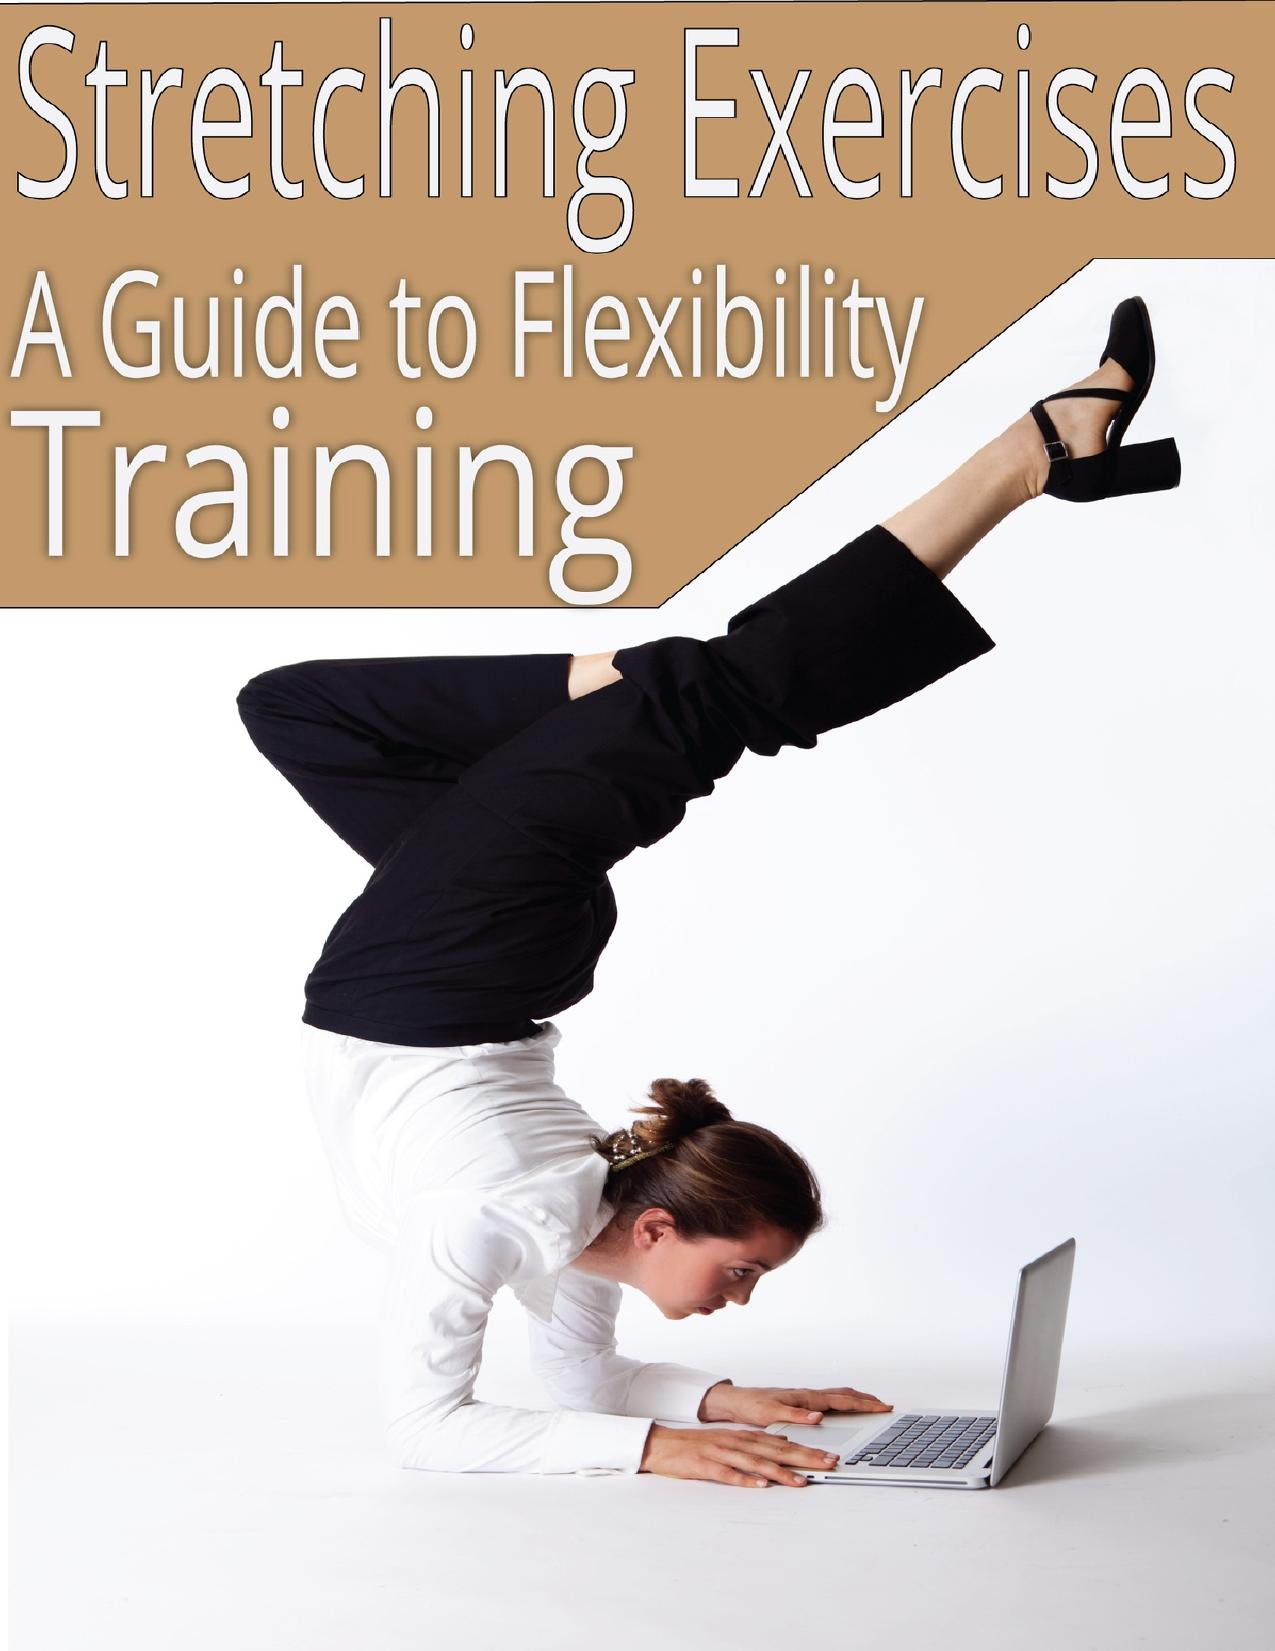 Stretching Exercises - A Guide to Flexibility Training by Fobi Martin